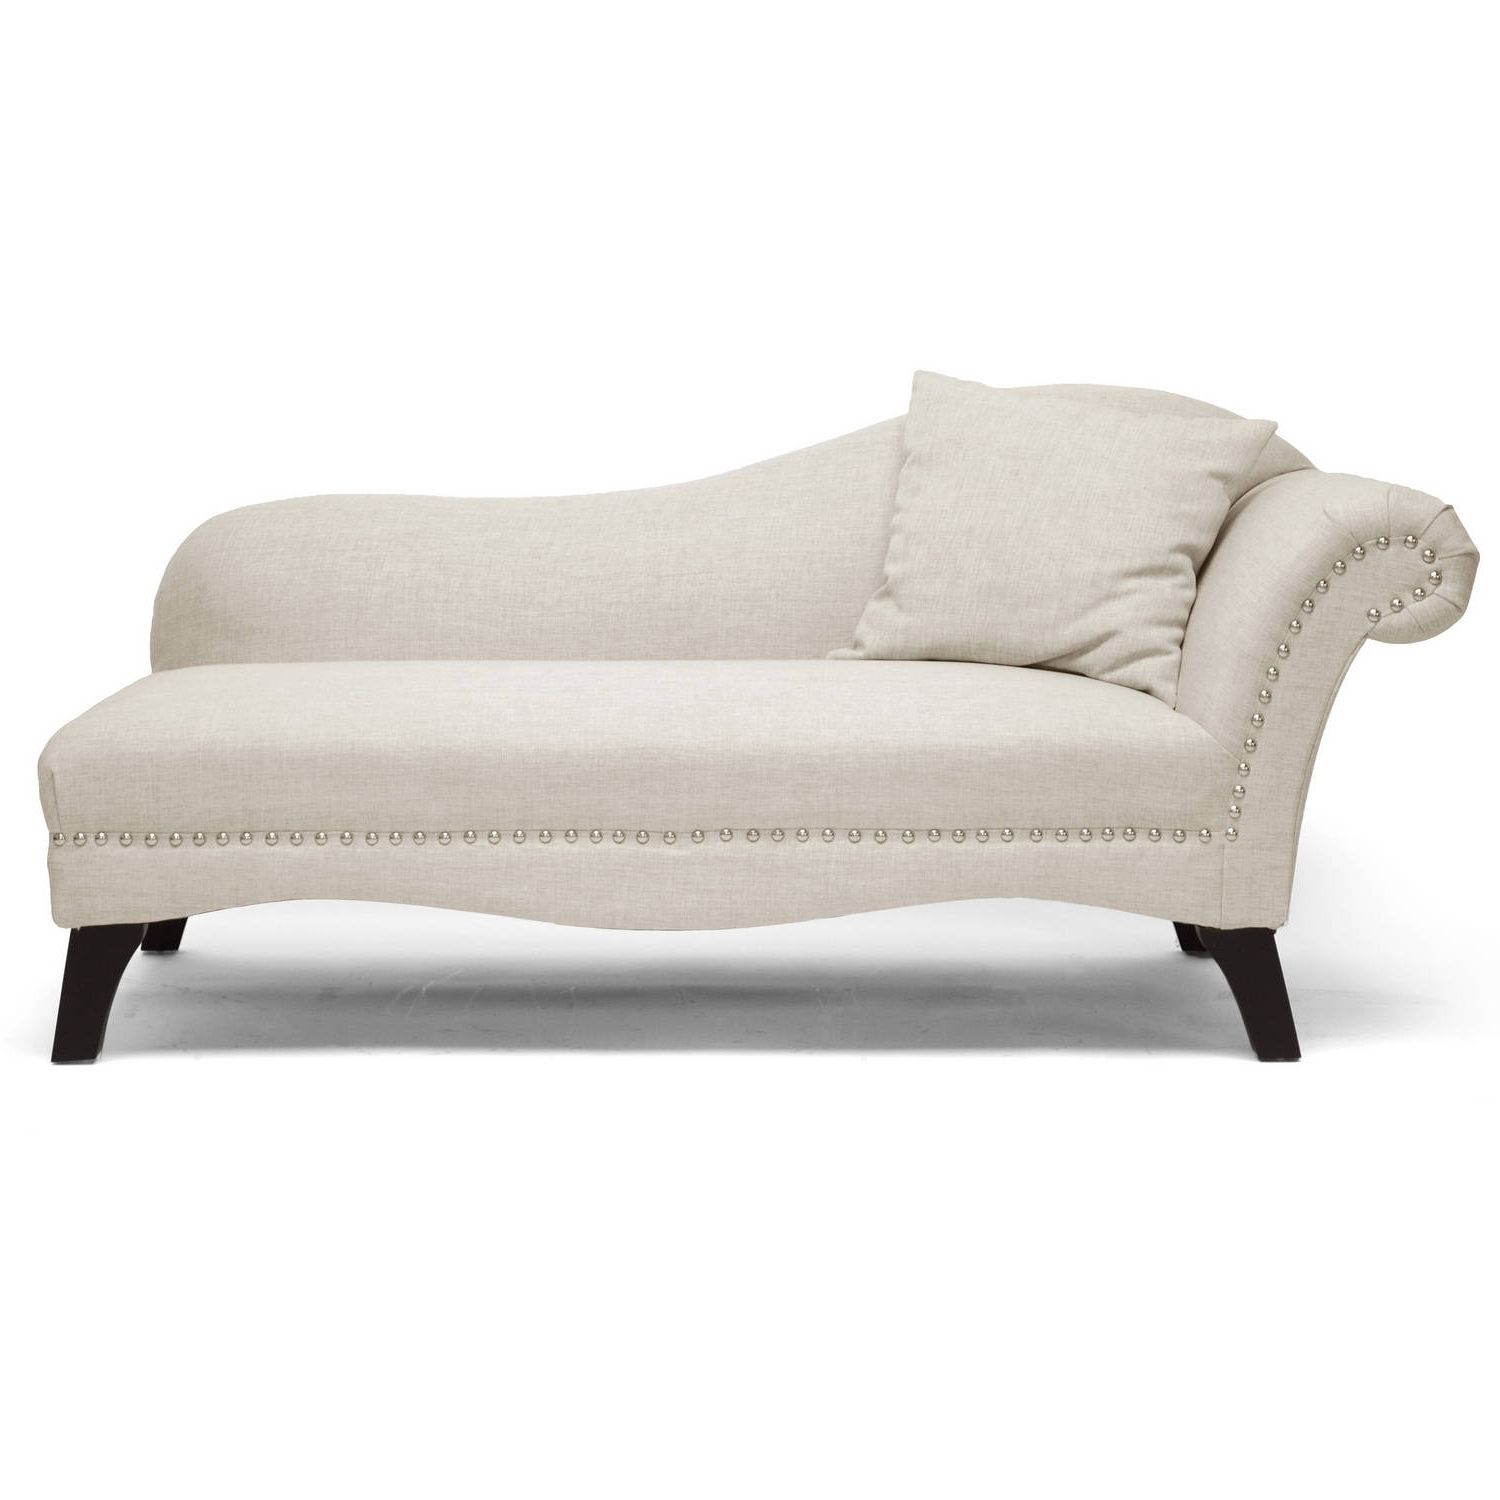 Most Popular Chaise Lounge Chairs For Indoor With Chaise Lounges – Walmart (View 15 of 15)